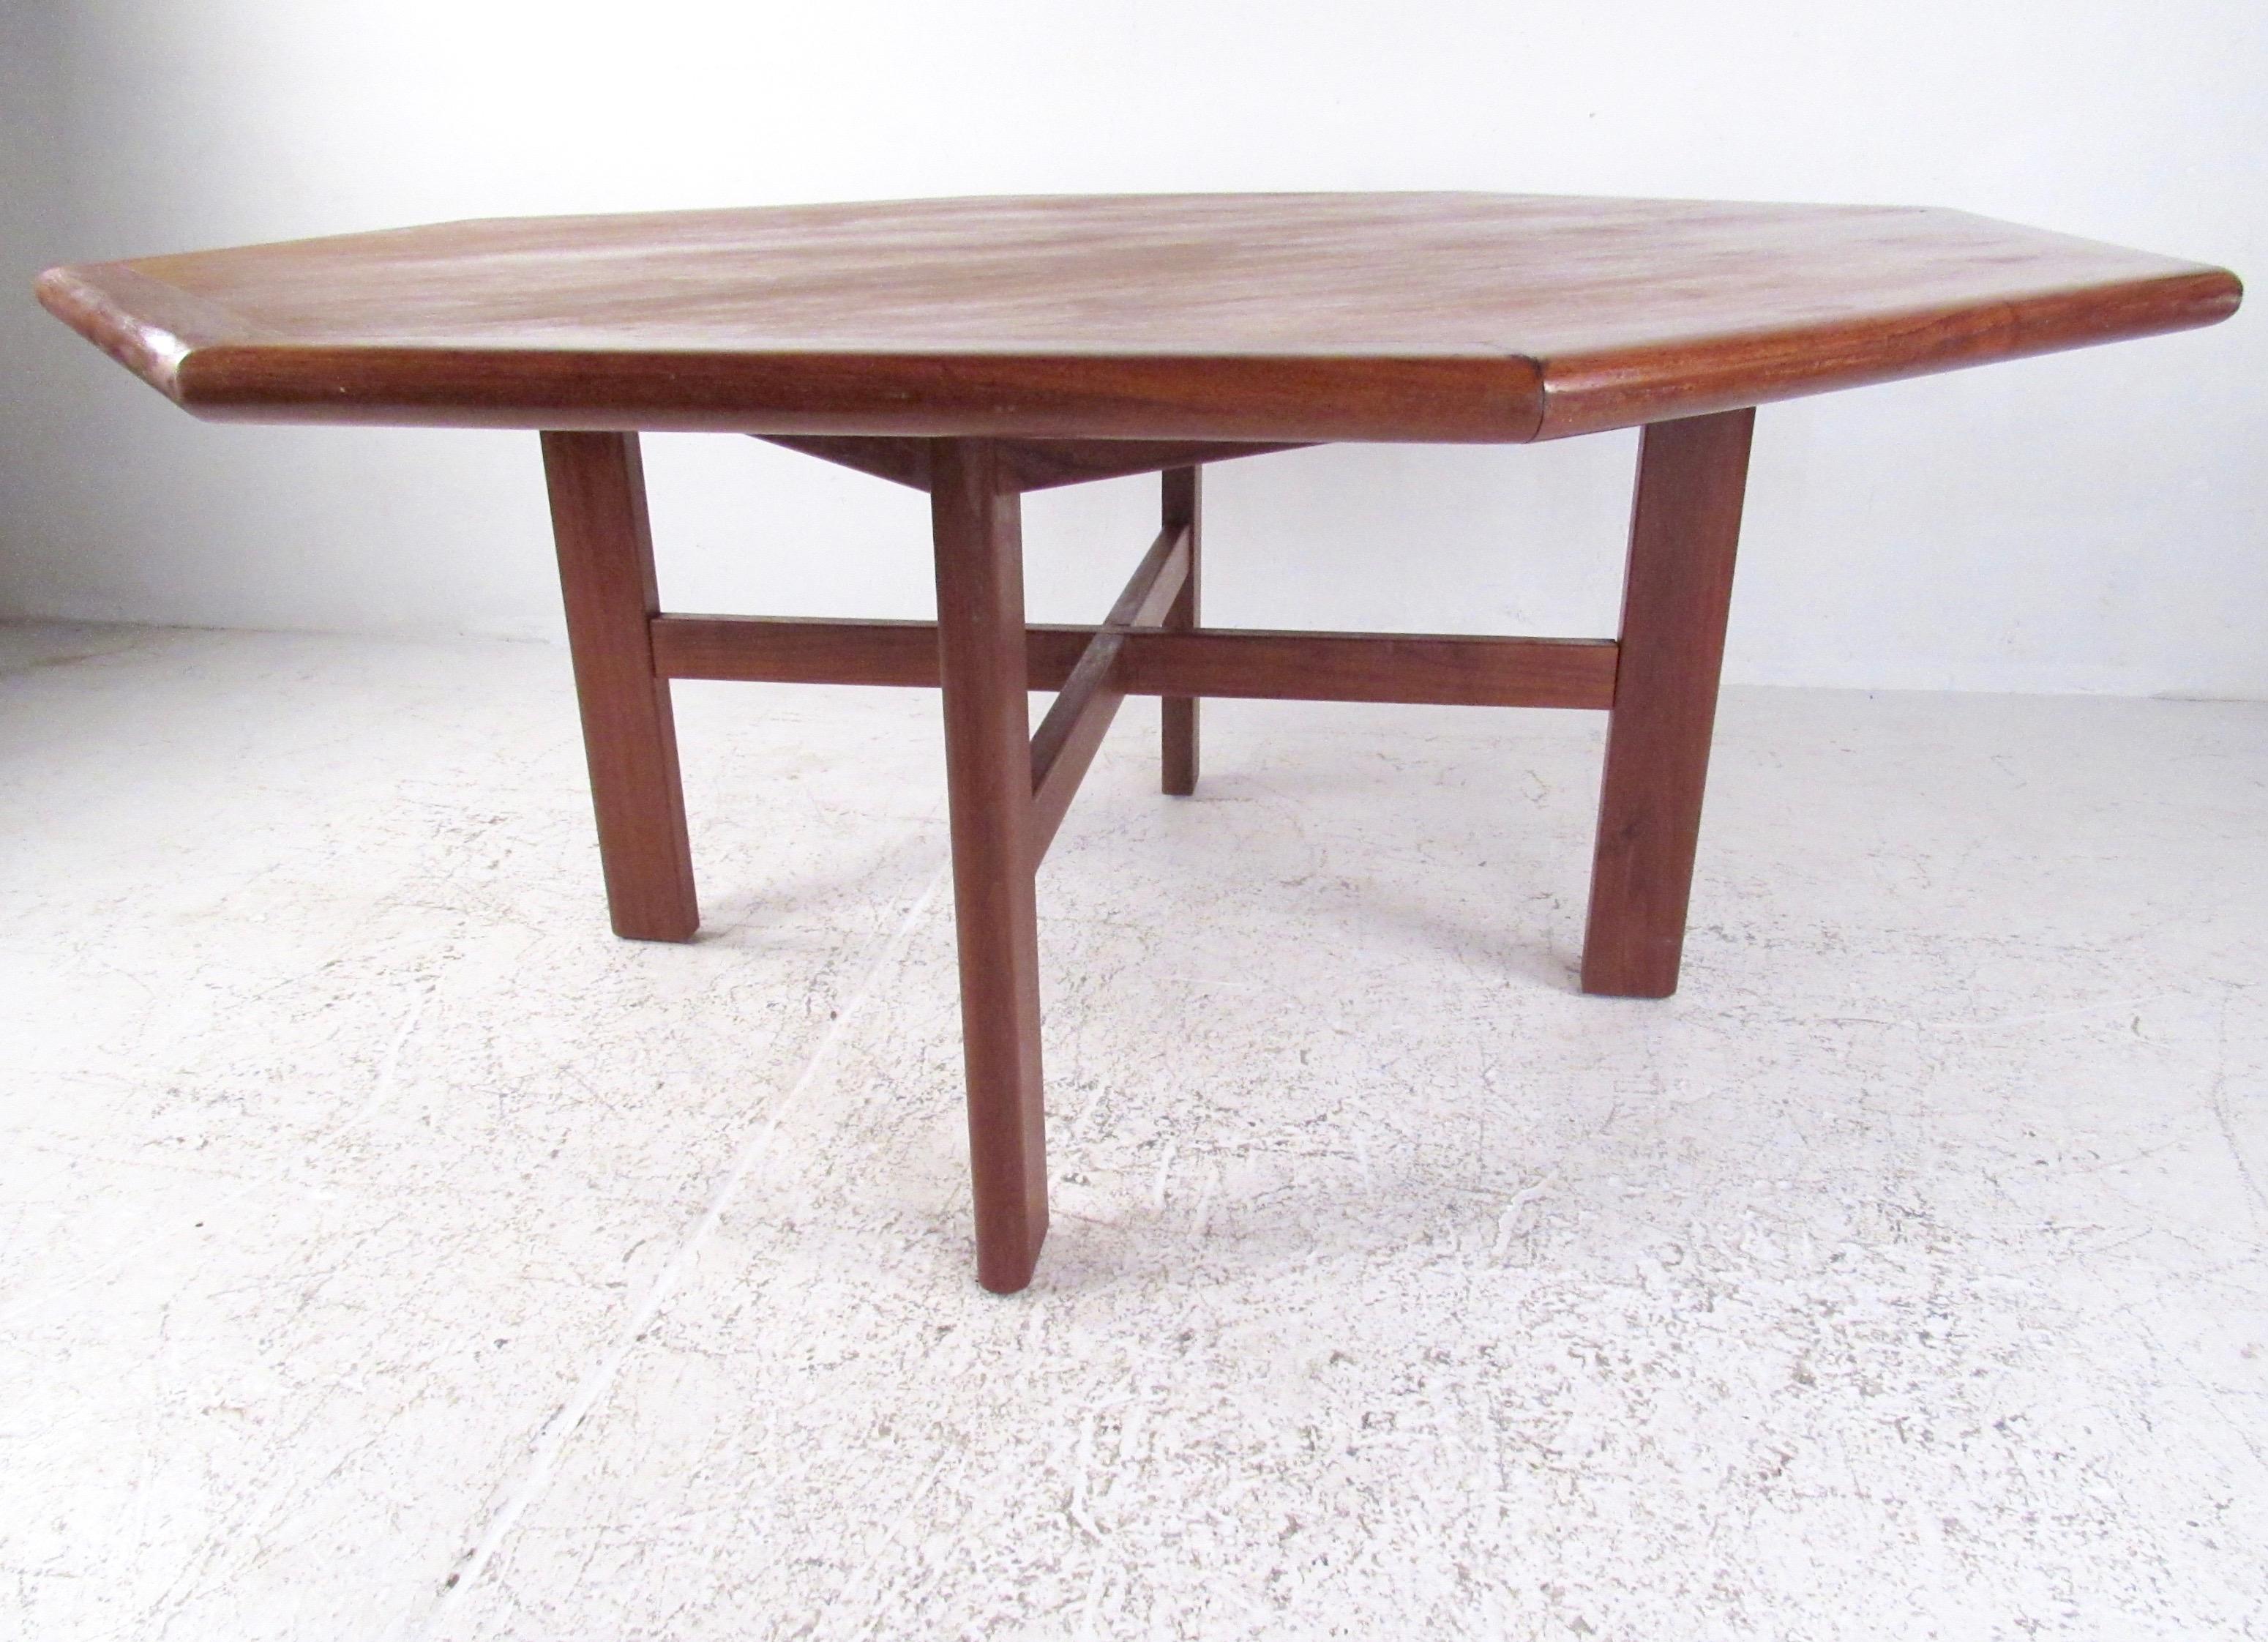 Large octagonal teak dining table features sturdy hardwood construction and striking vintage teak finish. Impressive Mid-Century Modern design makes this Scandinavian modern teak table a substantial addition to home or business dining or meeting